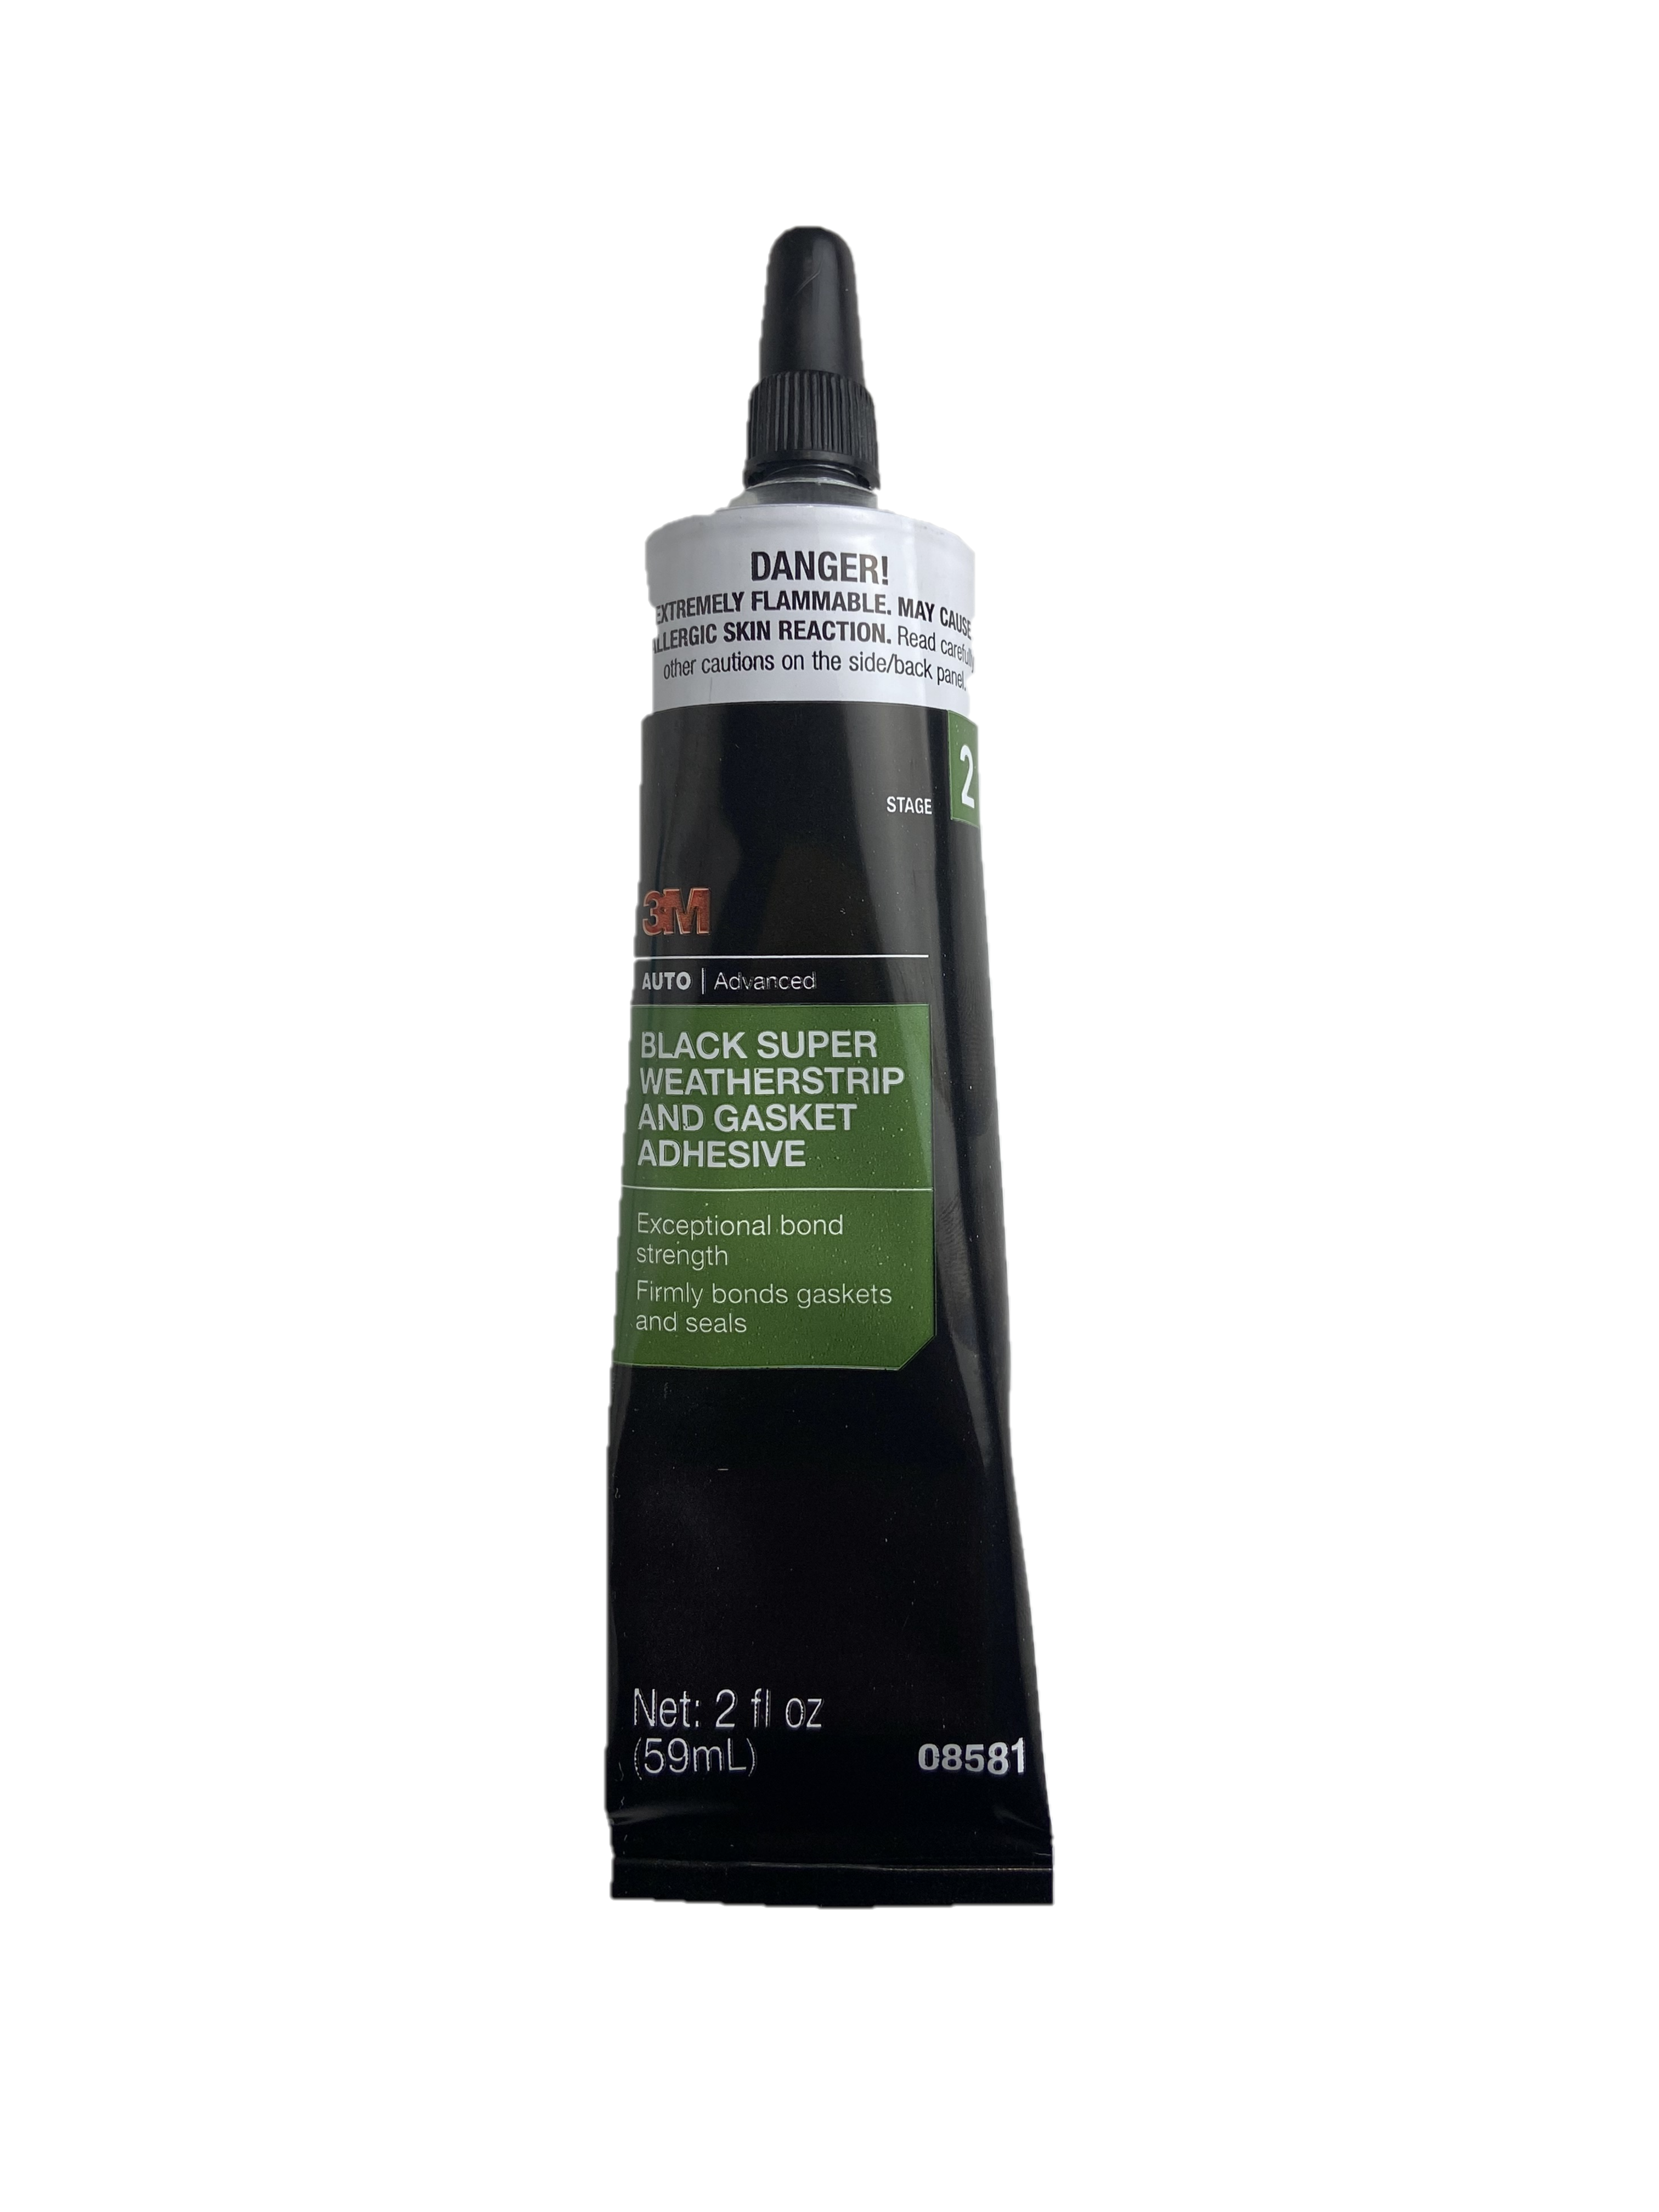 Black Super Weatherstrip and Gasket Adhesive by 3M at Fleet Farm